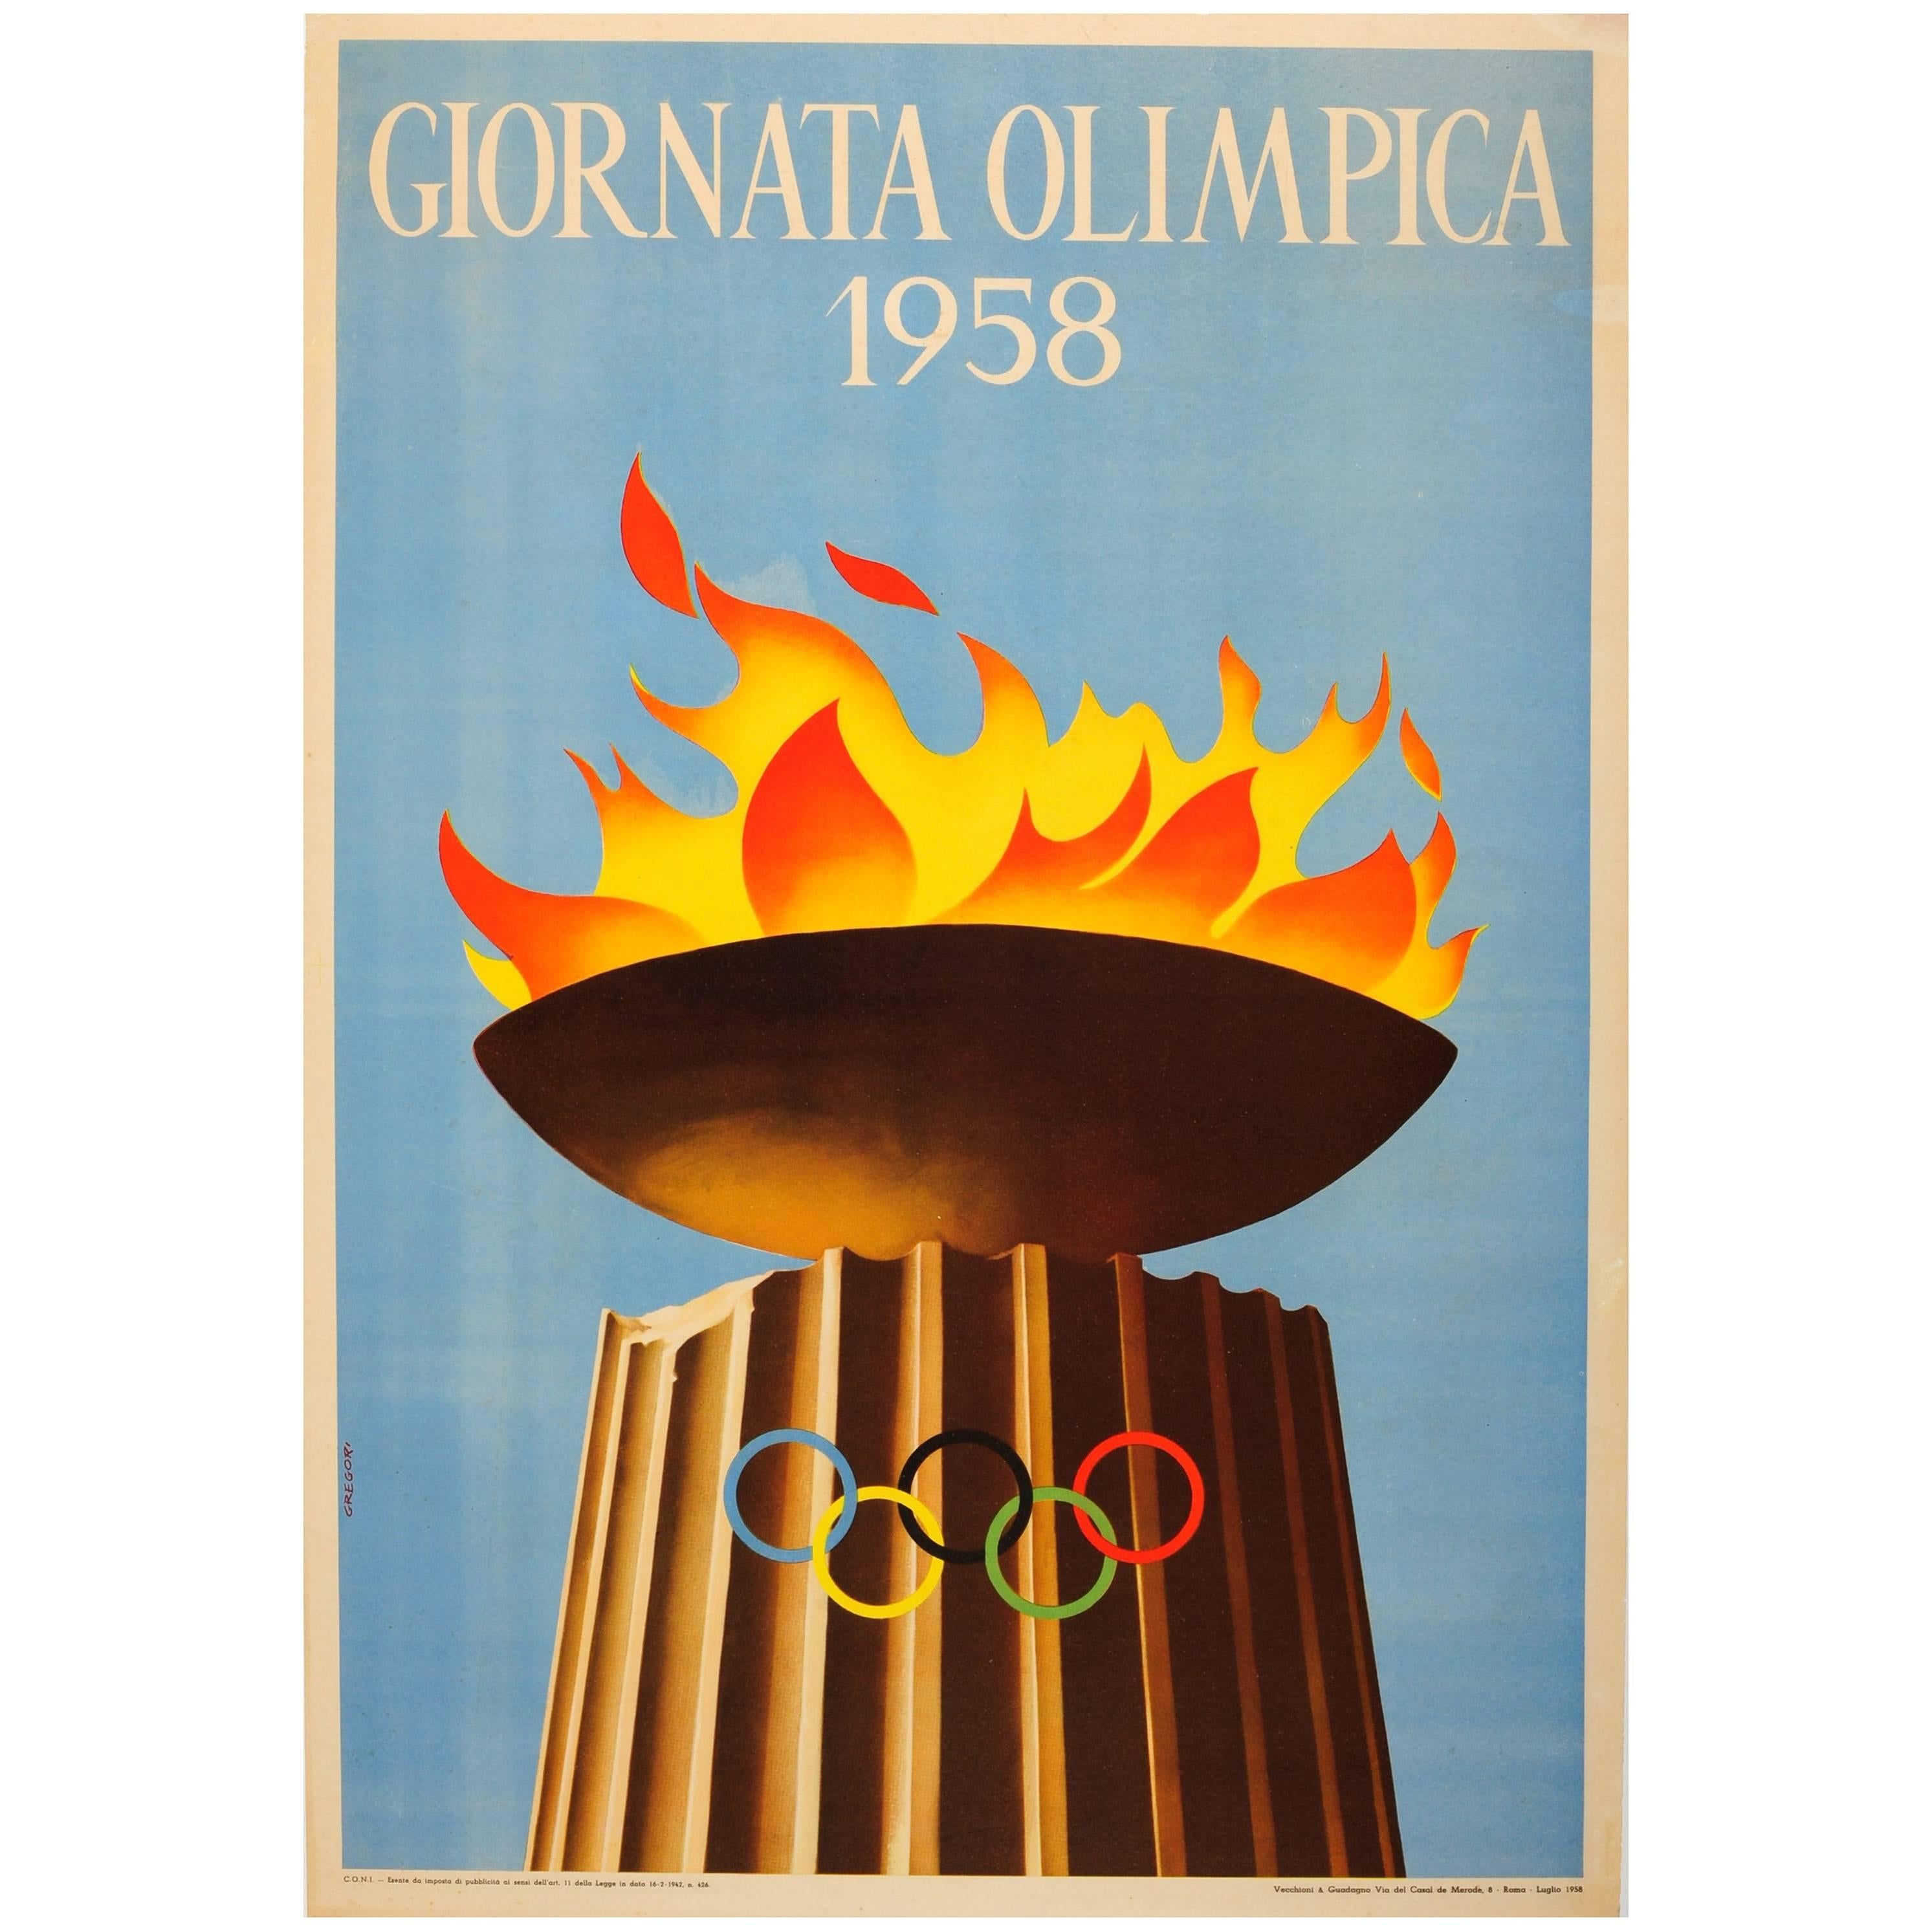 Original XVII Olympic Games Sport Event Poster - Giornata Olimpica / Olympic Day